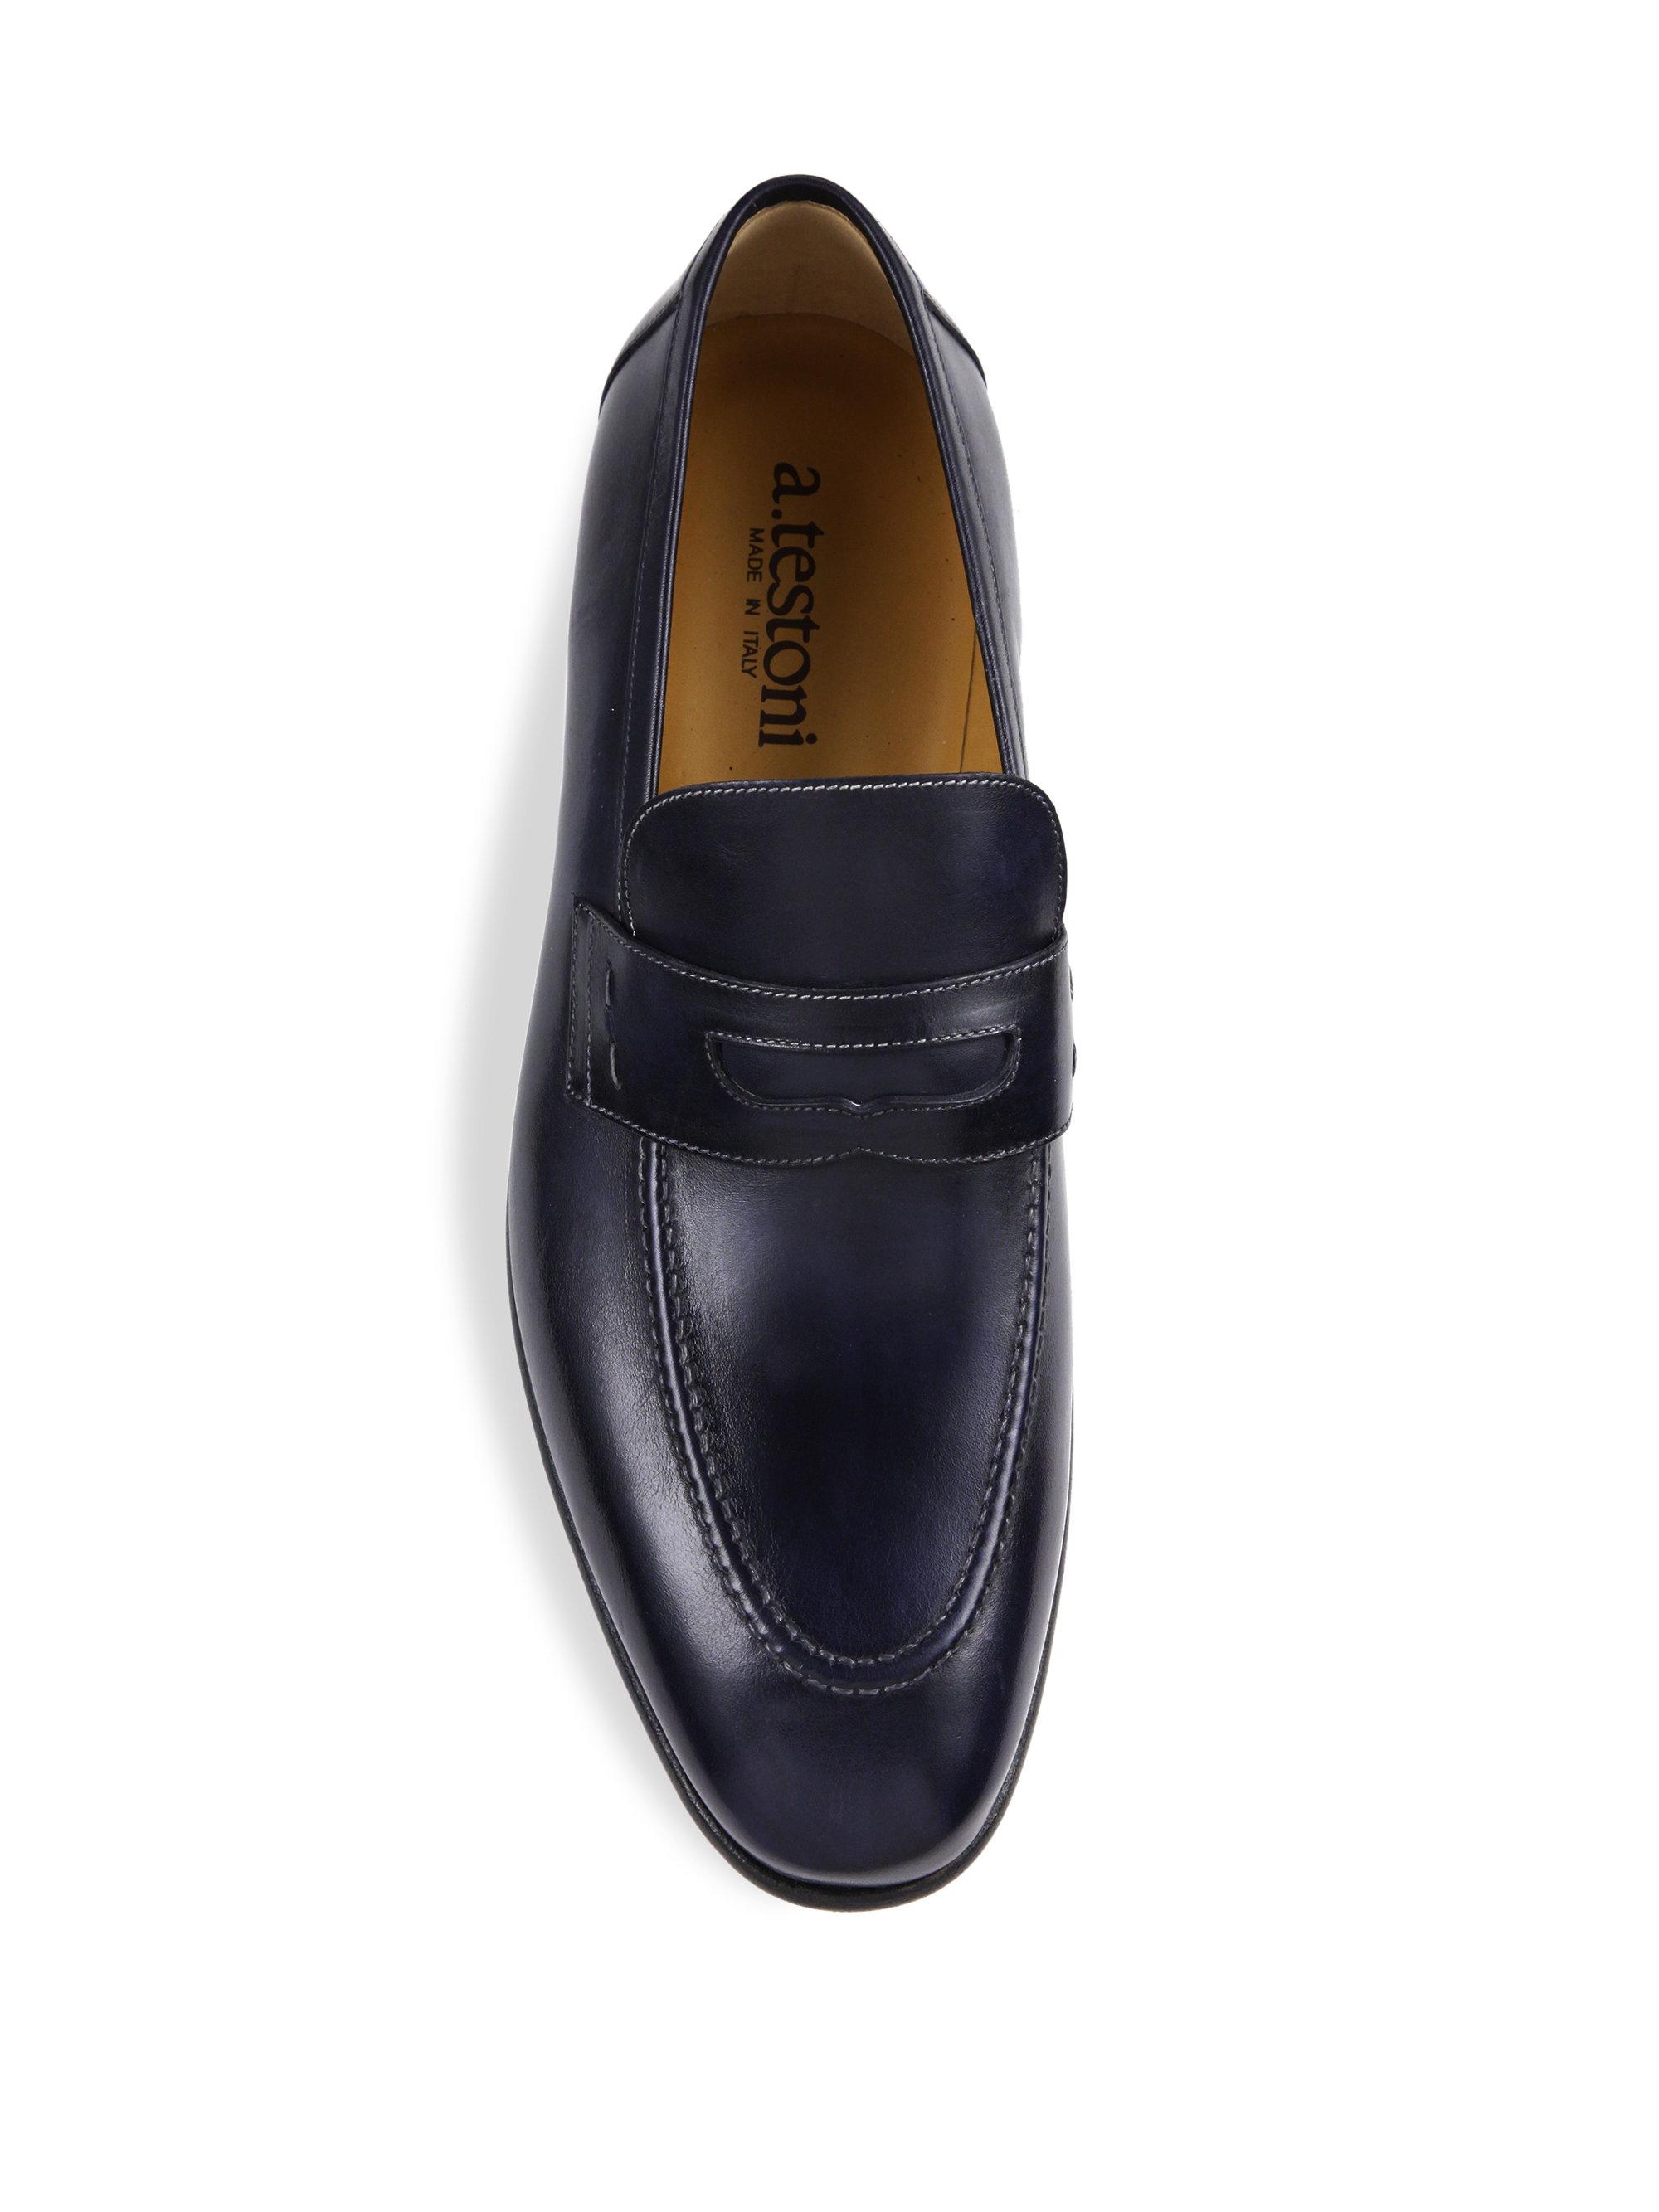 A.Testoni Penny Slip-on Leather Loafers in Navy (Blue) for Men - Lyst